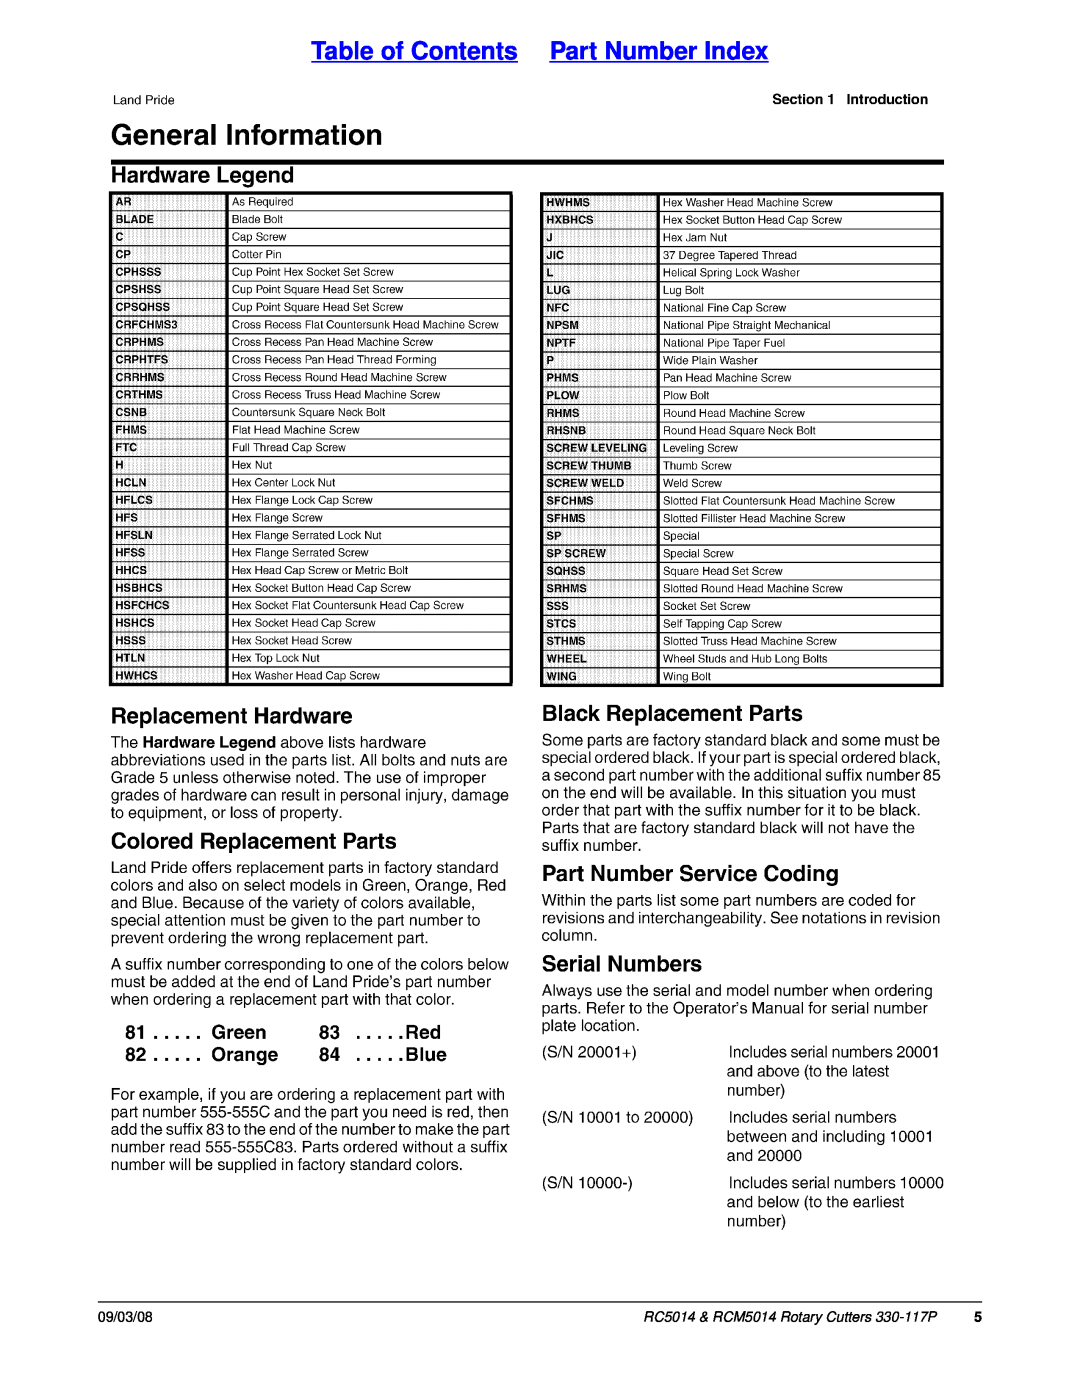 Land Pride manual Table of Contents Part Number Index, RC5014 & RCM5014 Rotary Cutters 330-117P, 09/03/08 